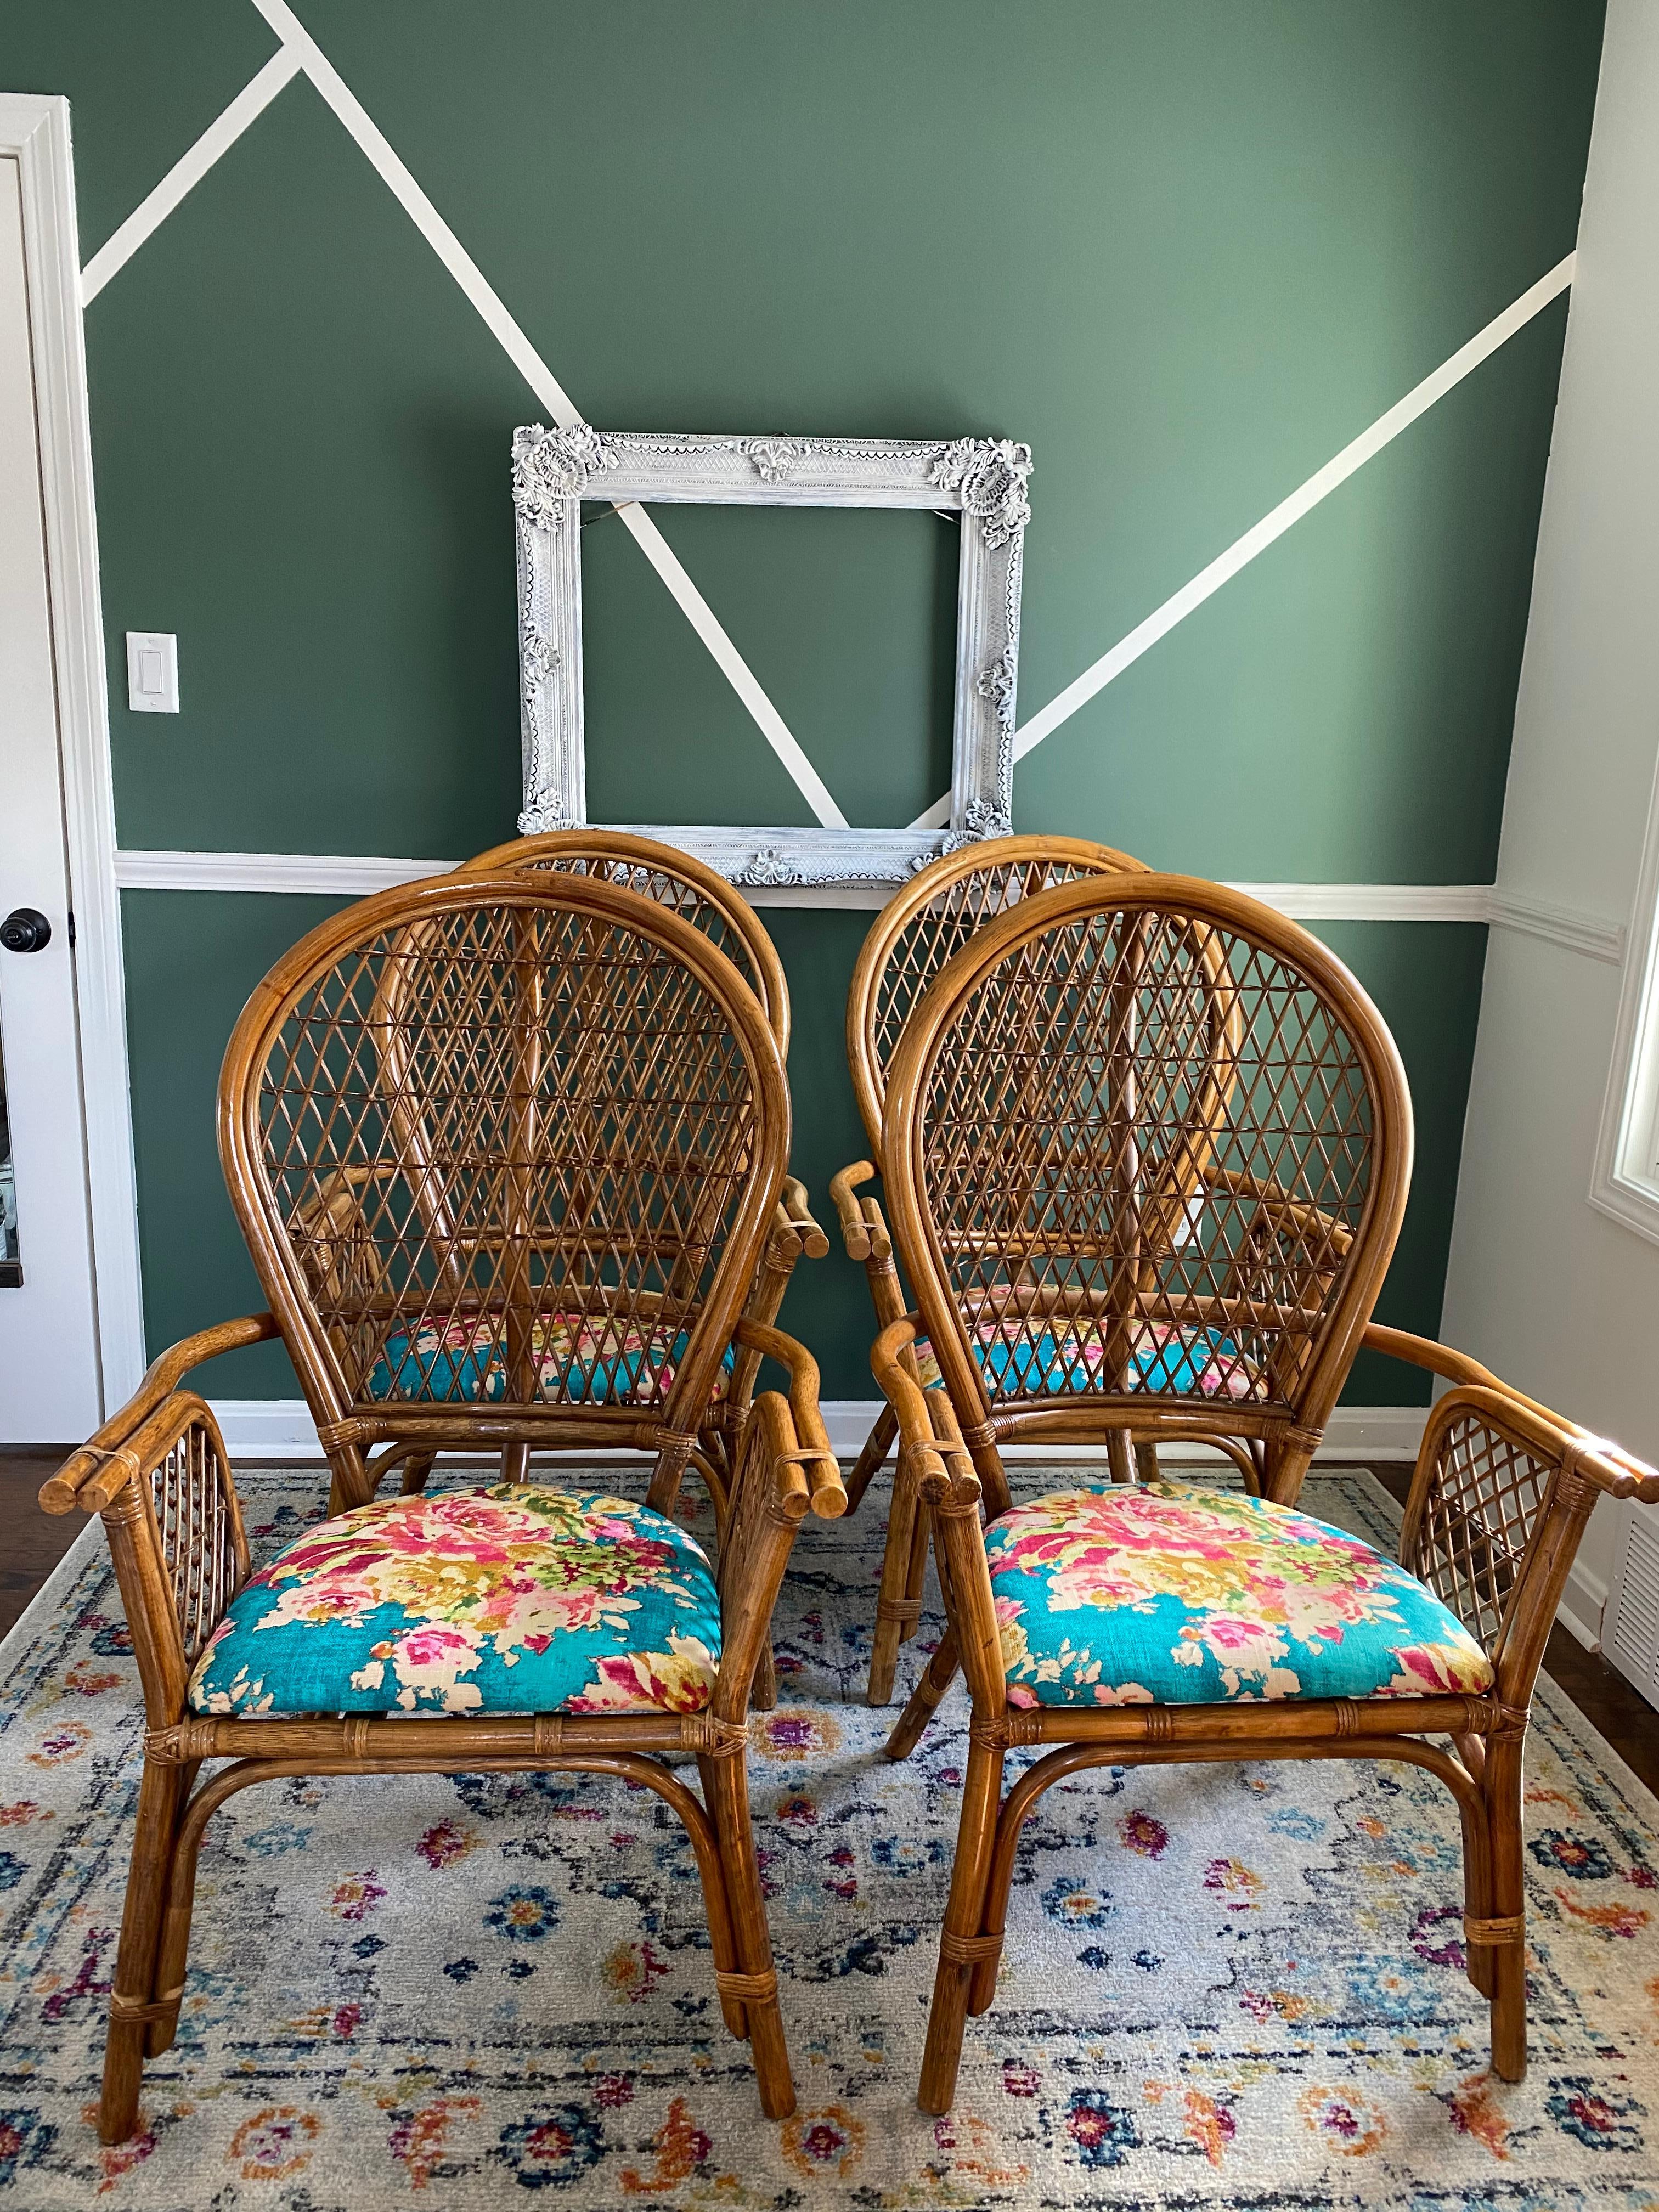 Beautiful set of four reupholstered bamboo/rattan Hollywood Regency Peacock outdoor/sunroom dining armchairs. These chairs are very special with wicker backing and arms, along with a beautiful curved back. All chairs are reupholstered in a bright